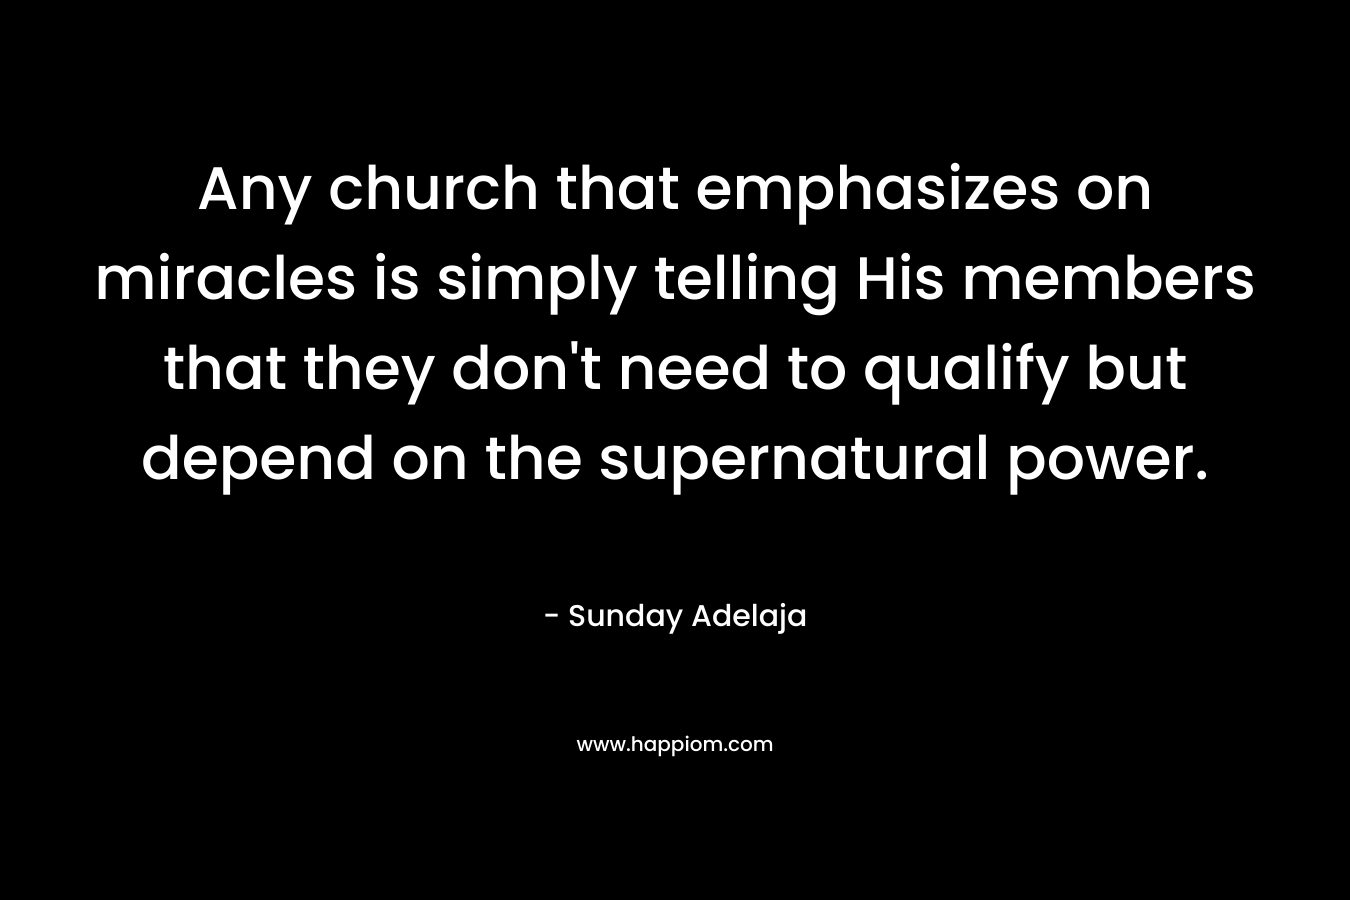 Any church that emphasizes on miracles is simply telling His members that they don’t need to qualify but depend on the supernatural power. – Sunday Adelaja